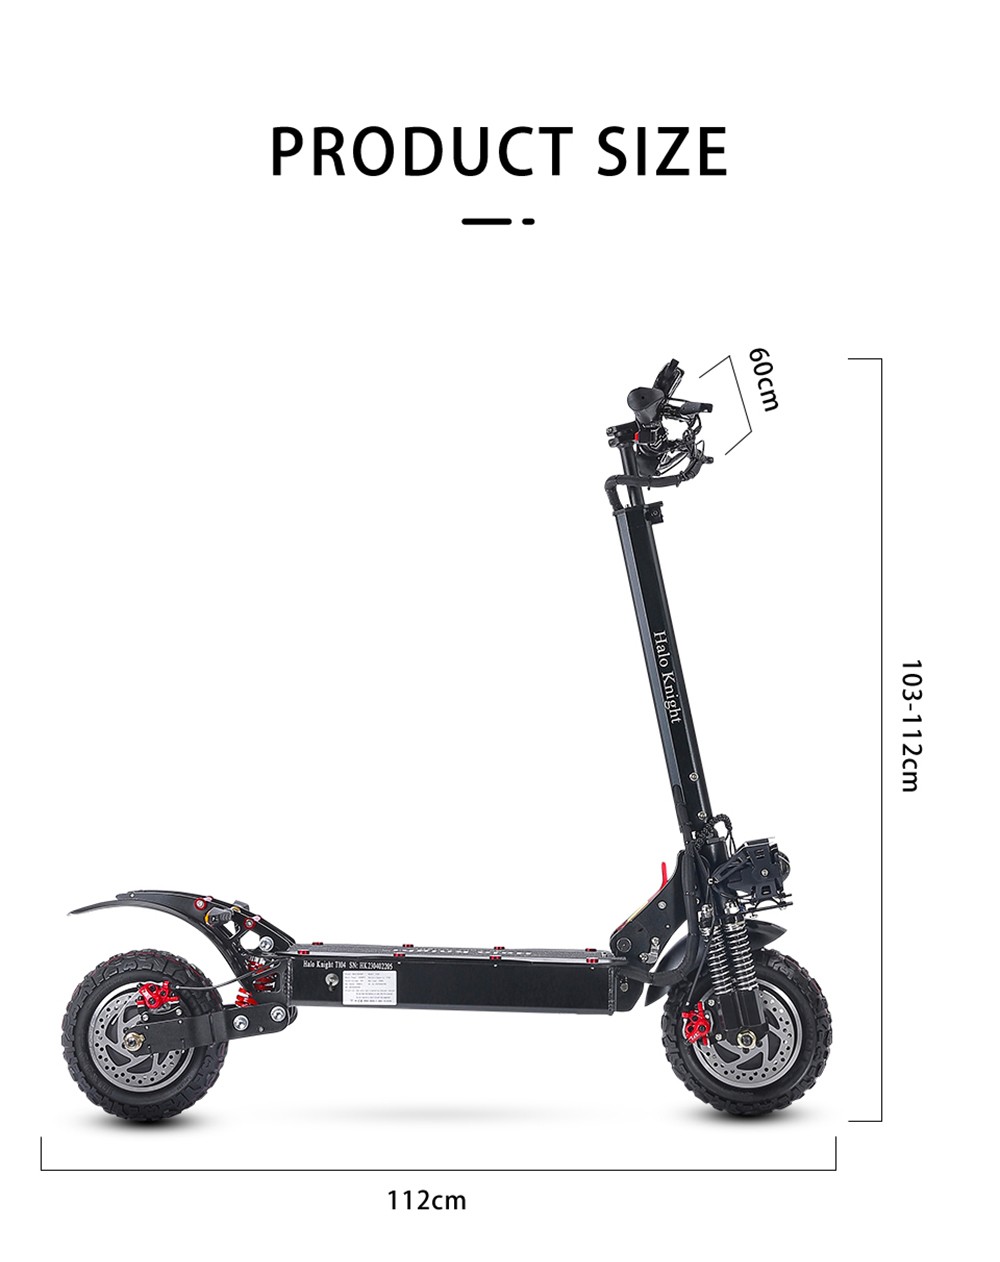 Halo Knight T104 Electric Scooter 21Ah Battery 1000W*2 Motor